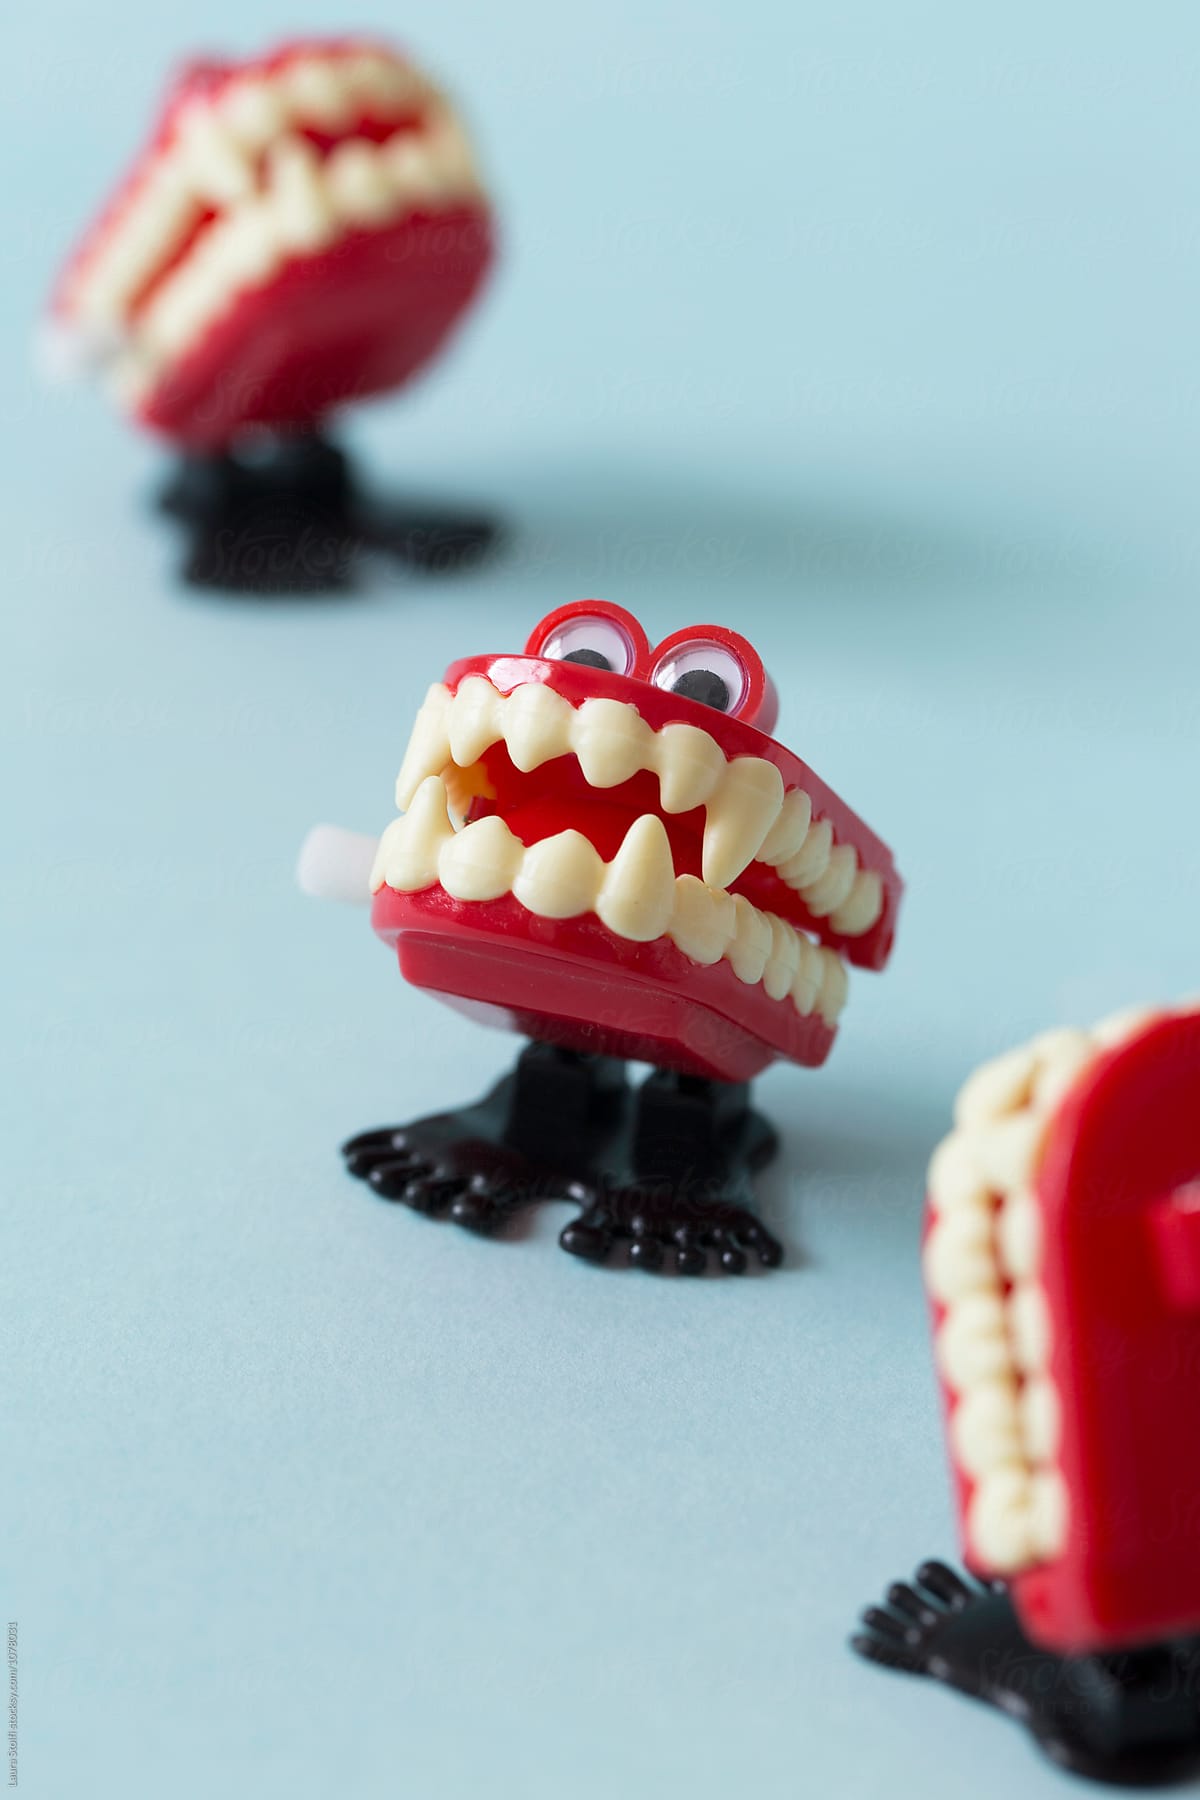 Marching dentures with vampires canine teeth